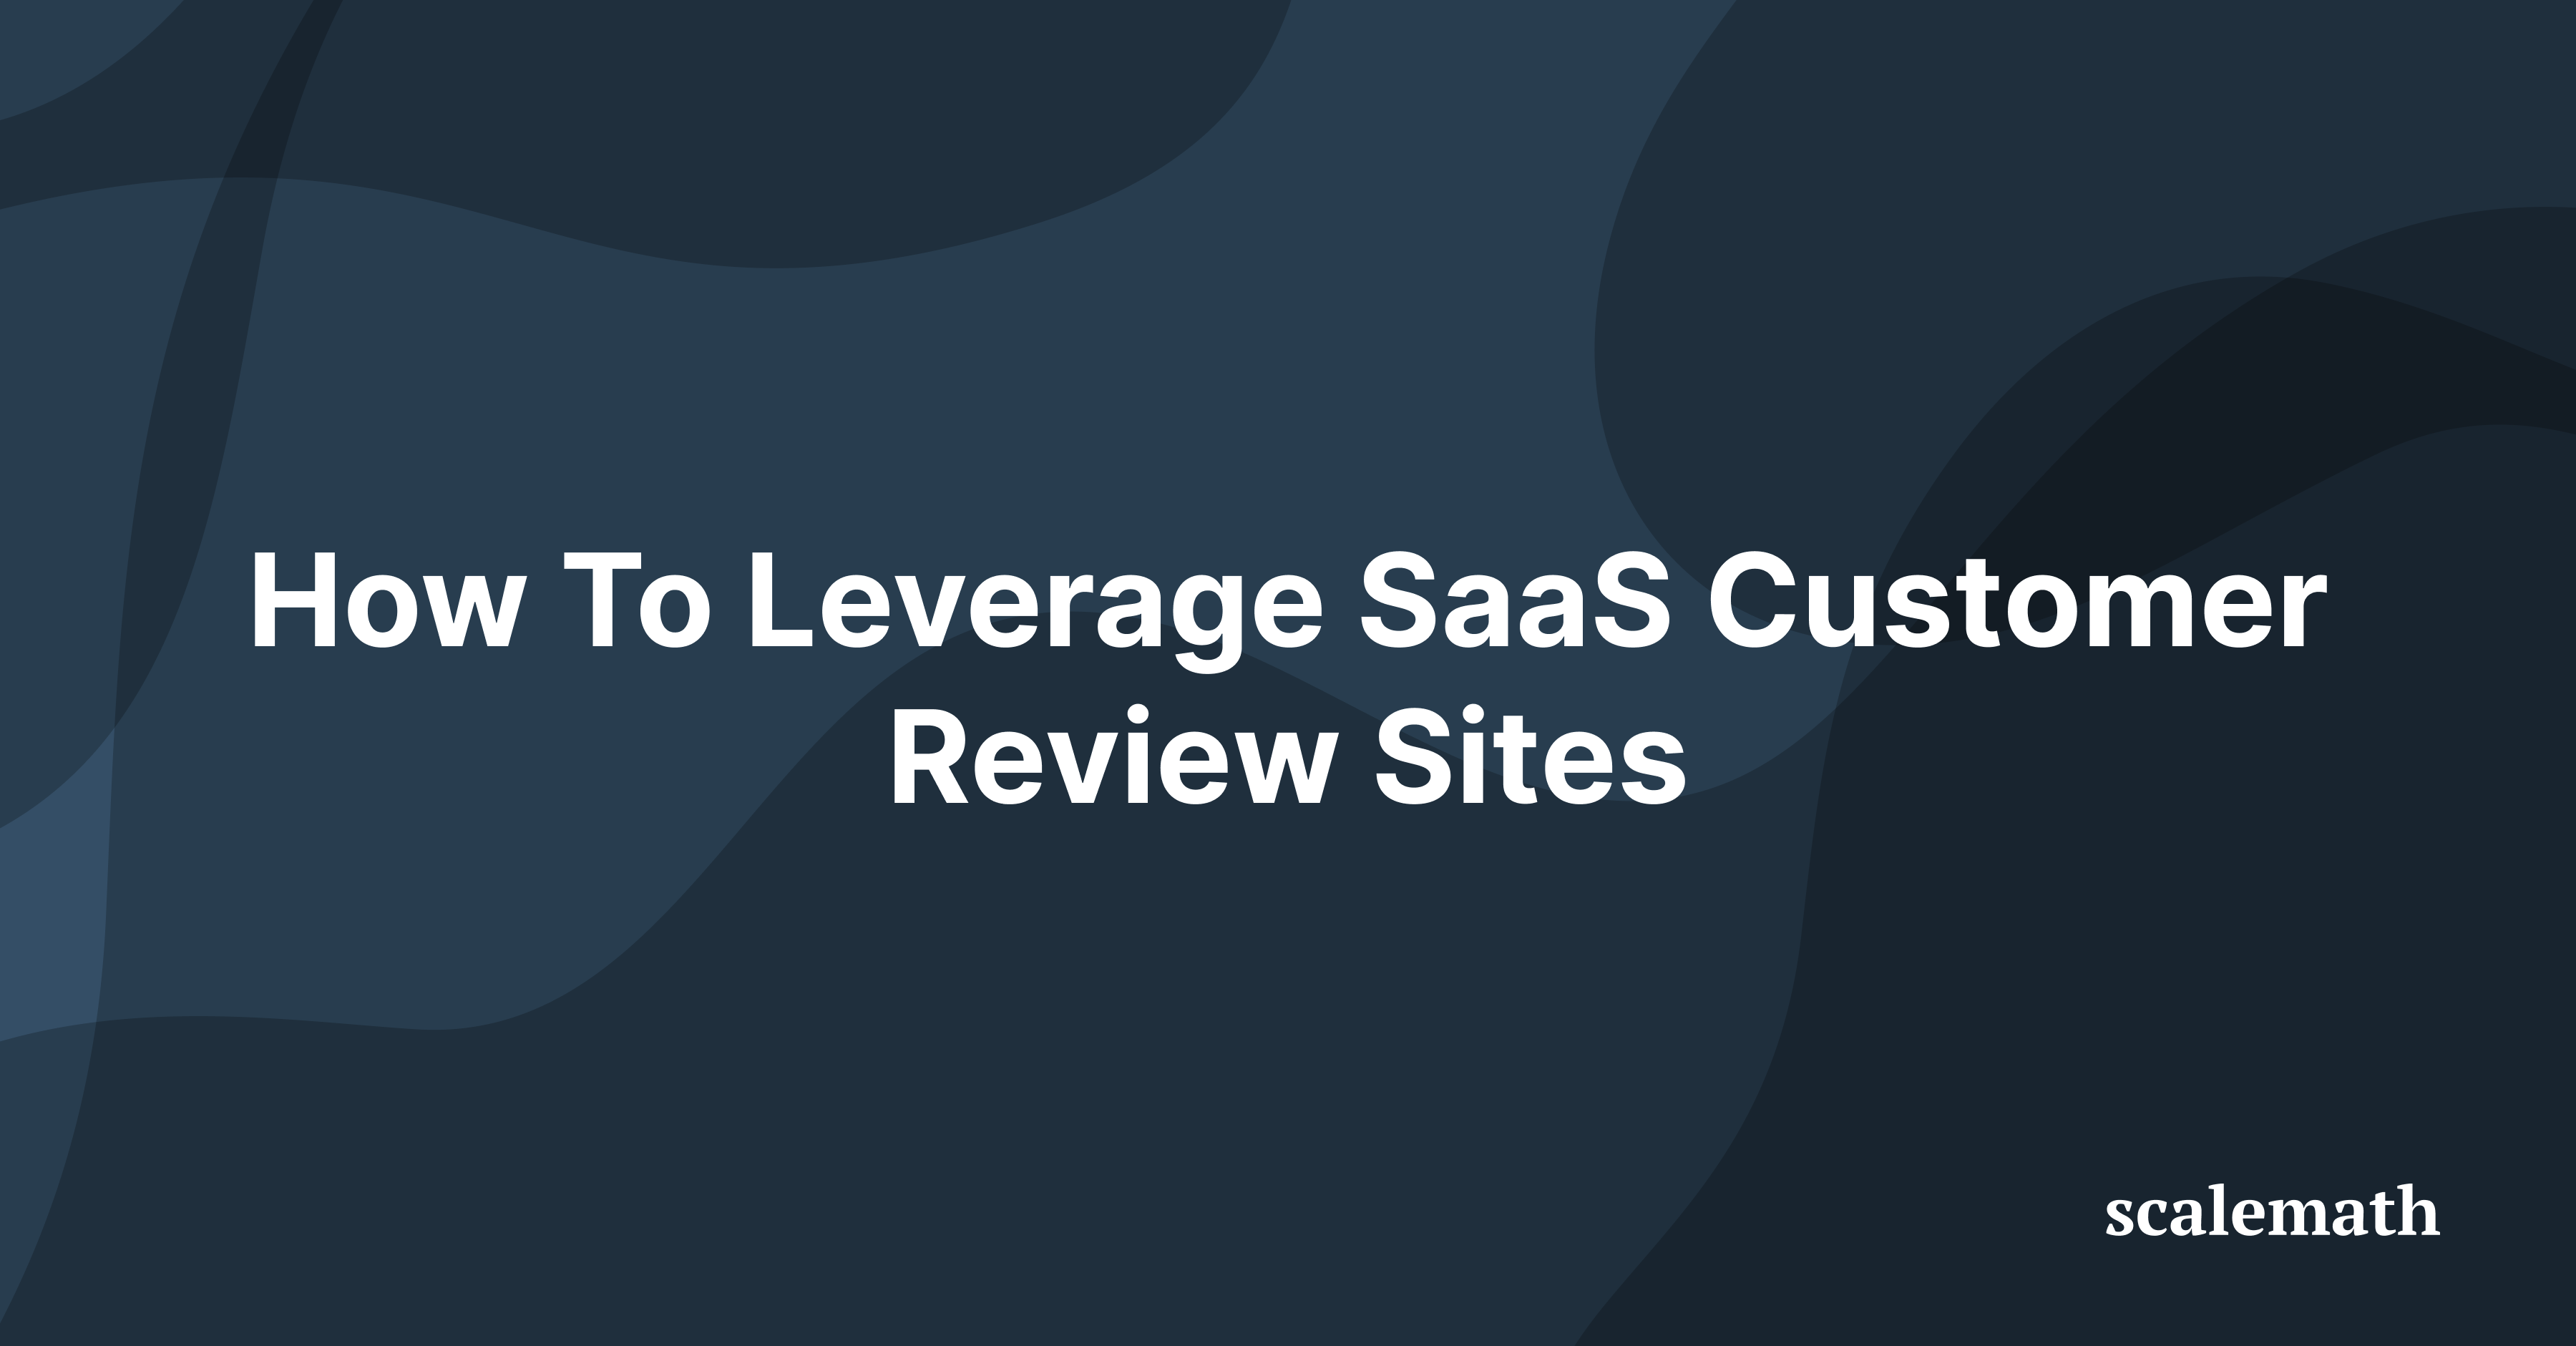 How To Leverage SaaS Customer Review Sites